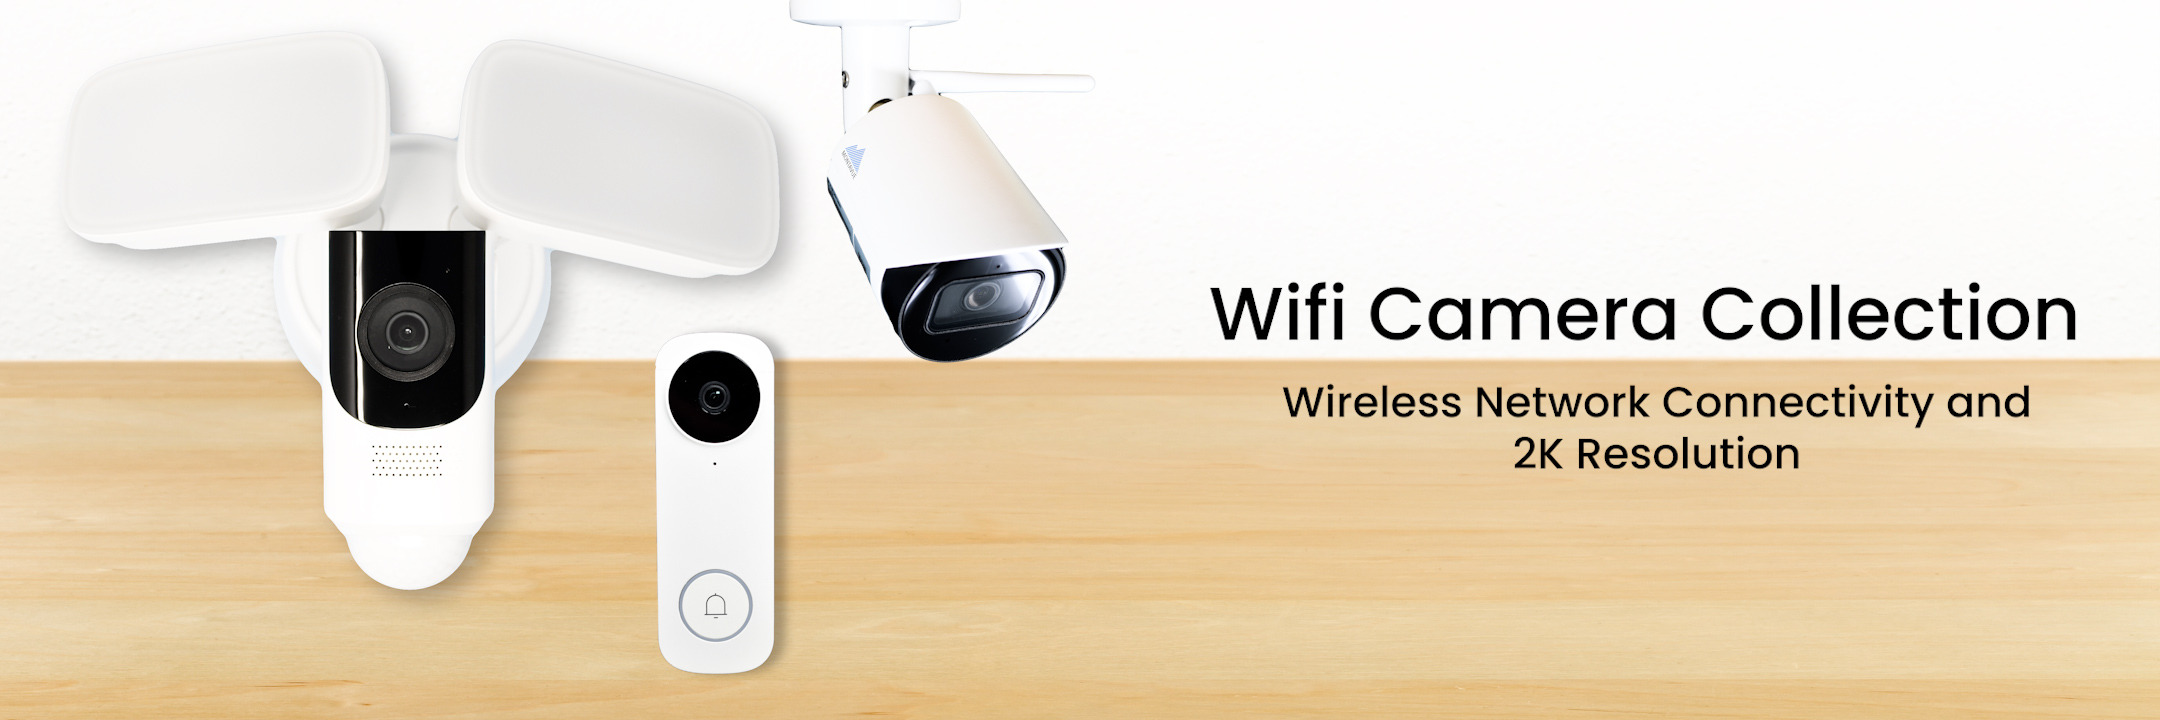 Wifi camera series with doorbell, floodlight, and bullet security cameras